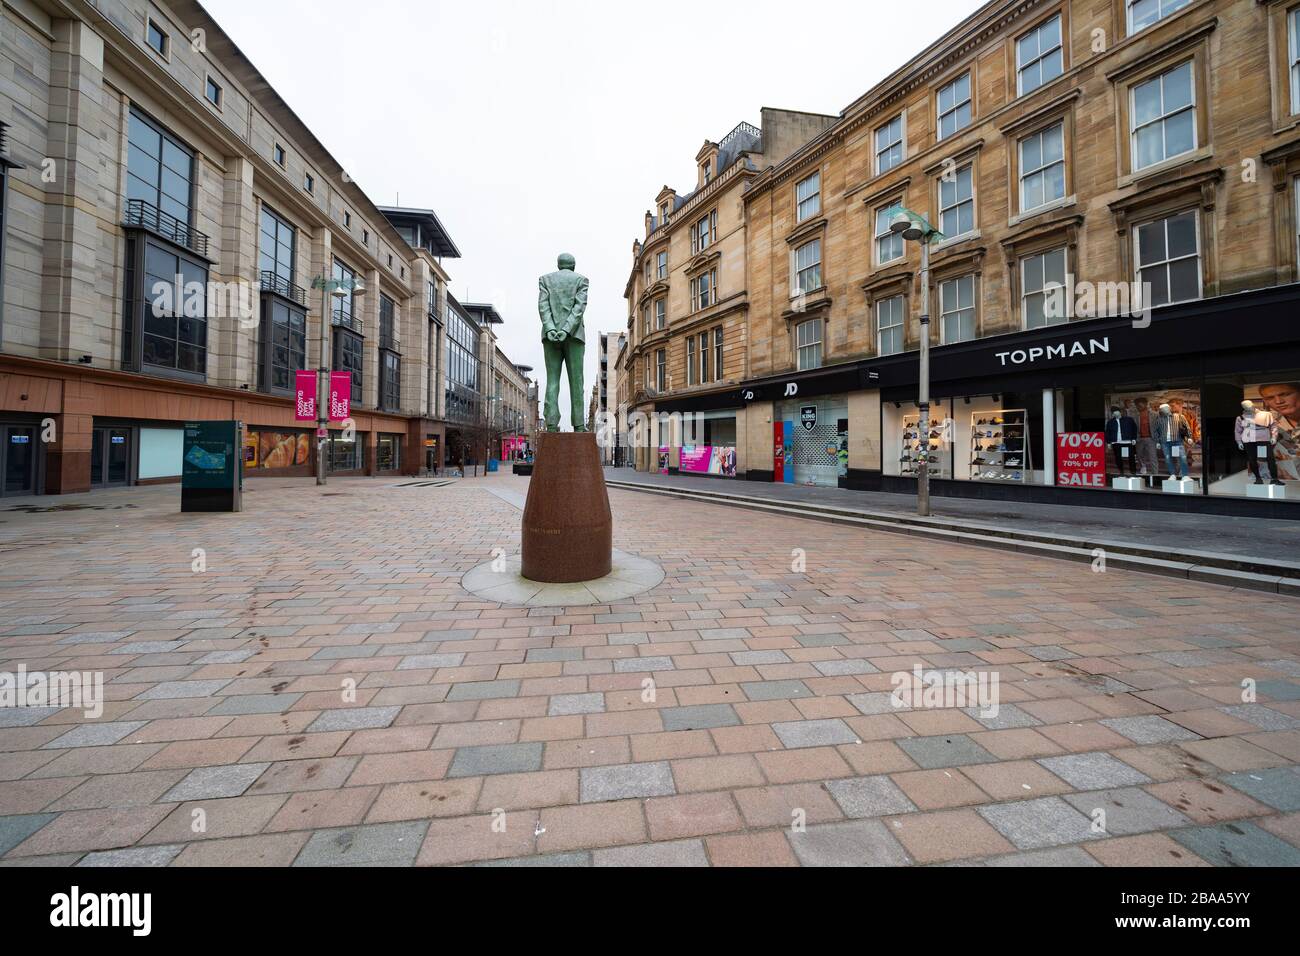 Glasgow, Scotland, UK. 26 March, 2020. Views from city centre in Glasgow on Thursday during the third day of the Government sanctioned Covid-19 lockdown. The city is largely deserted. Only food and convenience stores open. Pictured; Empty streets around statue of Donald Dewar on on Buchanan Street. Iain Masterton/Alamy Live News Stock Photo